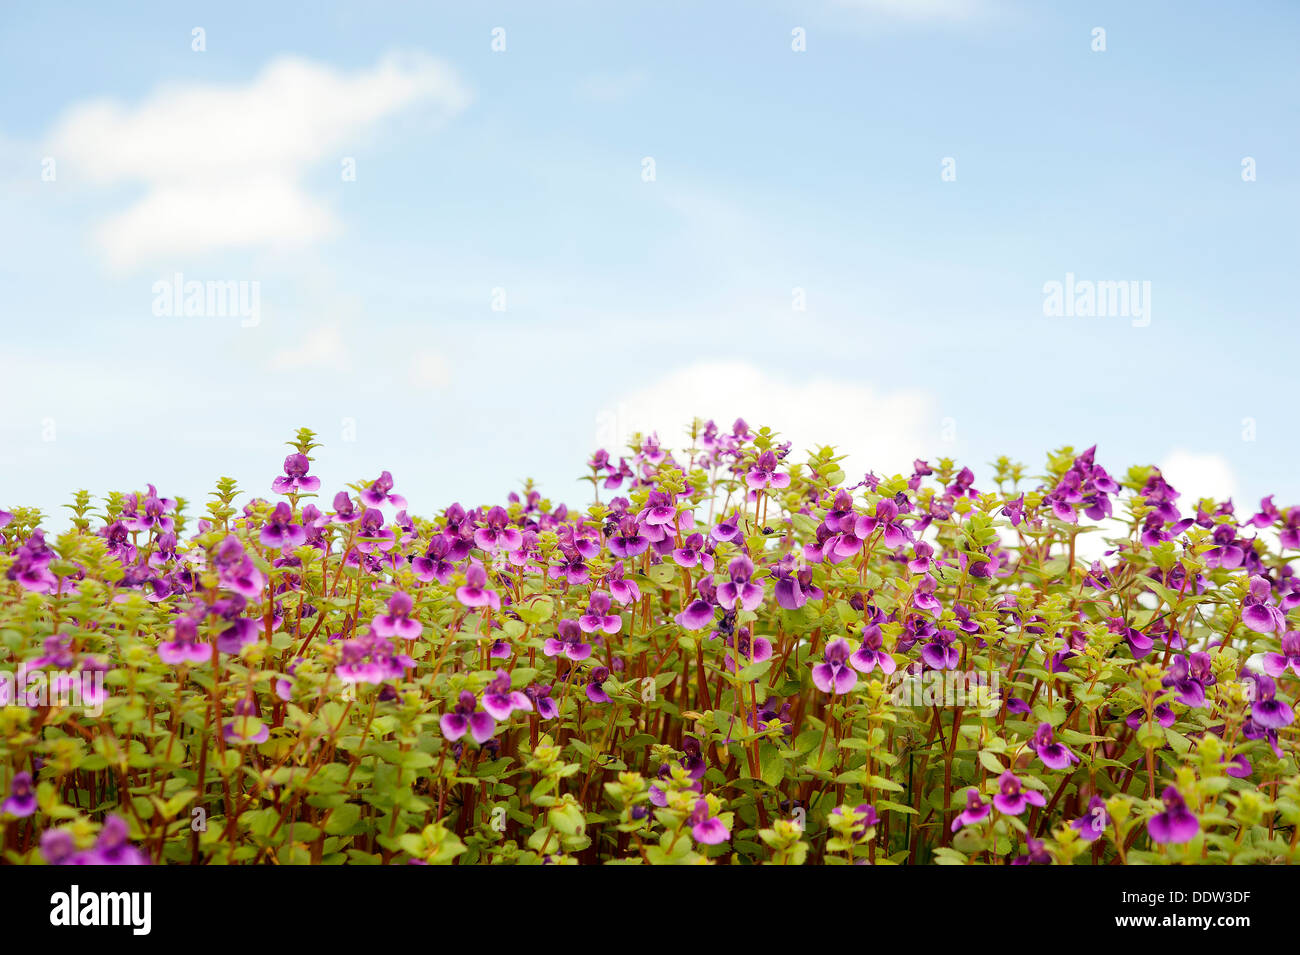 Bed of Flowers at Kass Plateau, UNESCO approved World Heritage Site Stock Photo